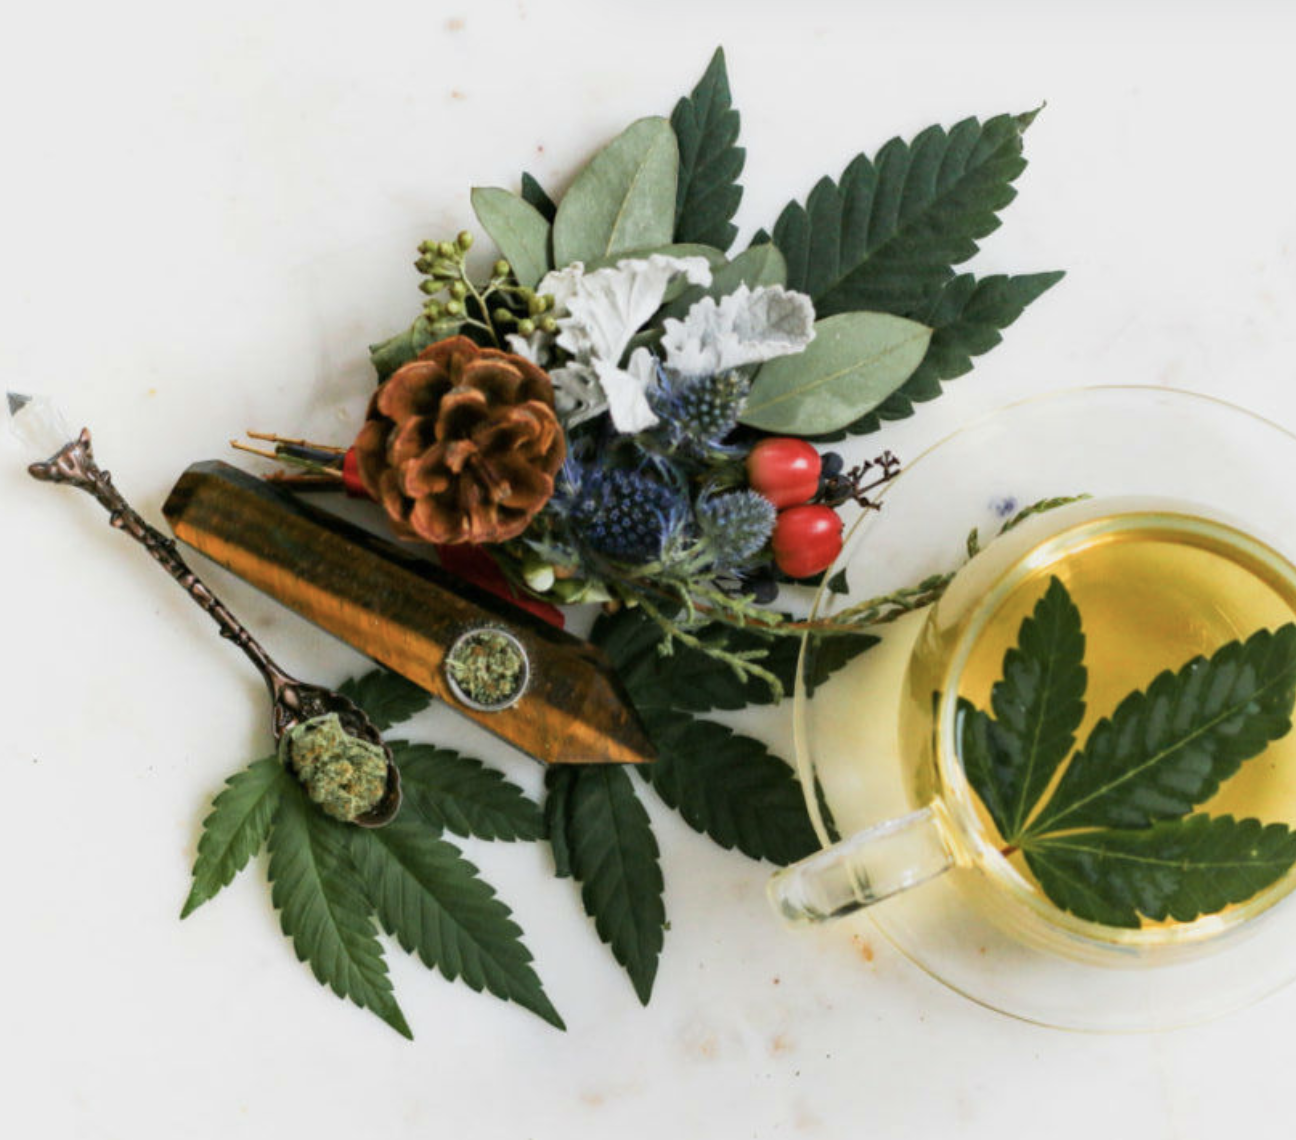 Cannabis can replace alcohol quite nicely.